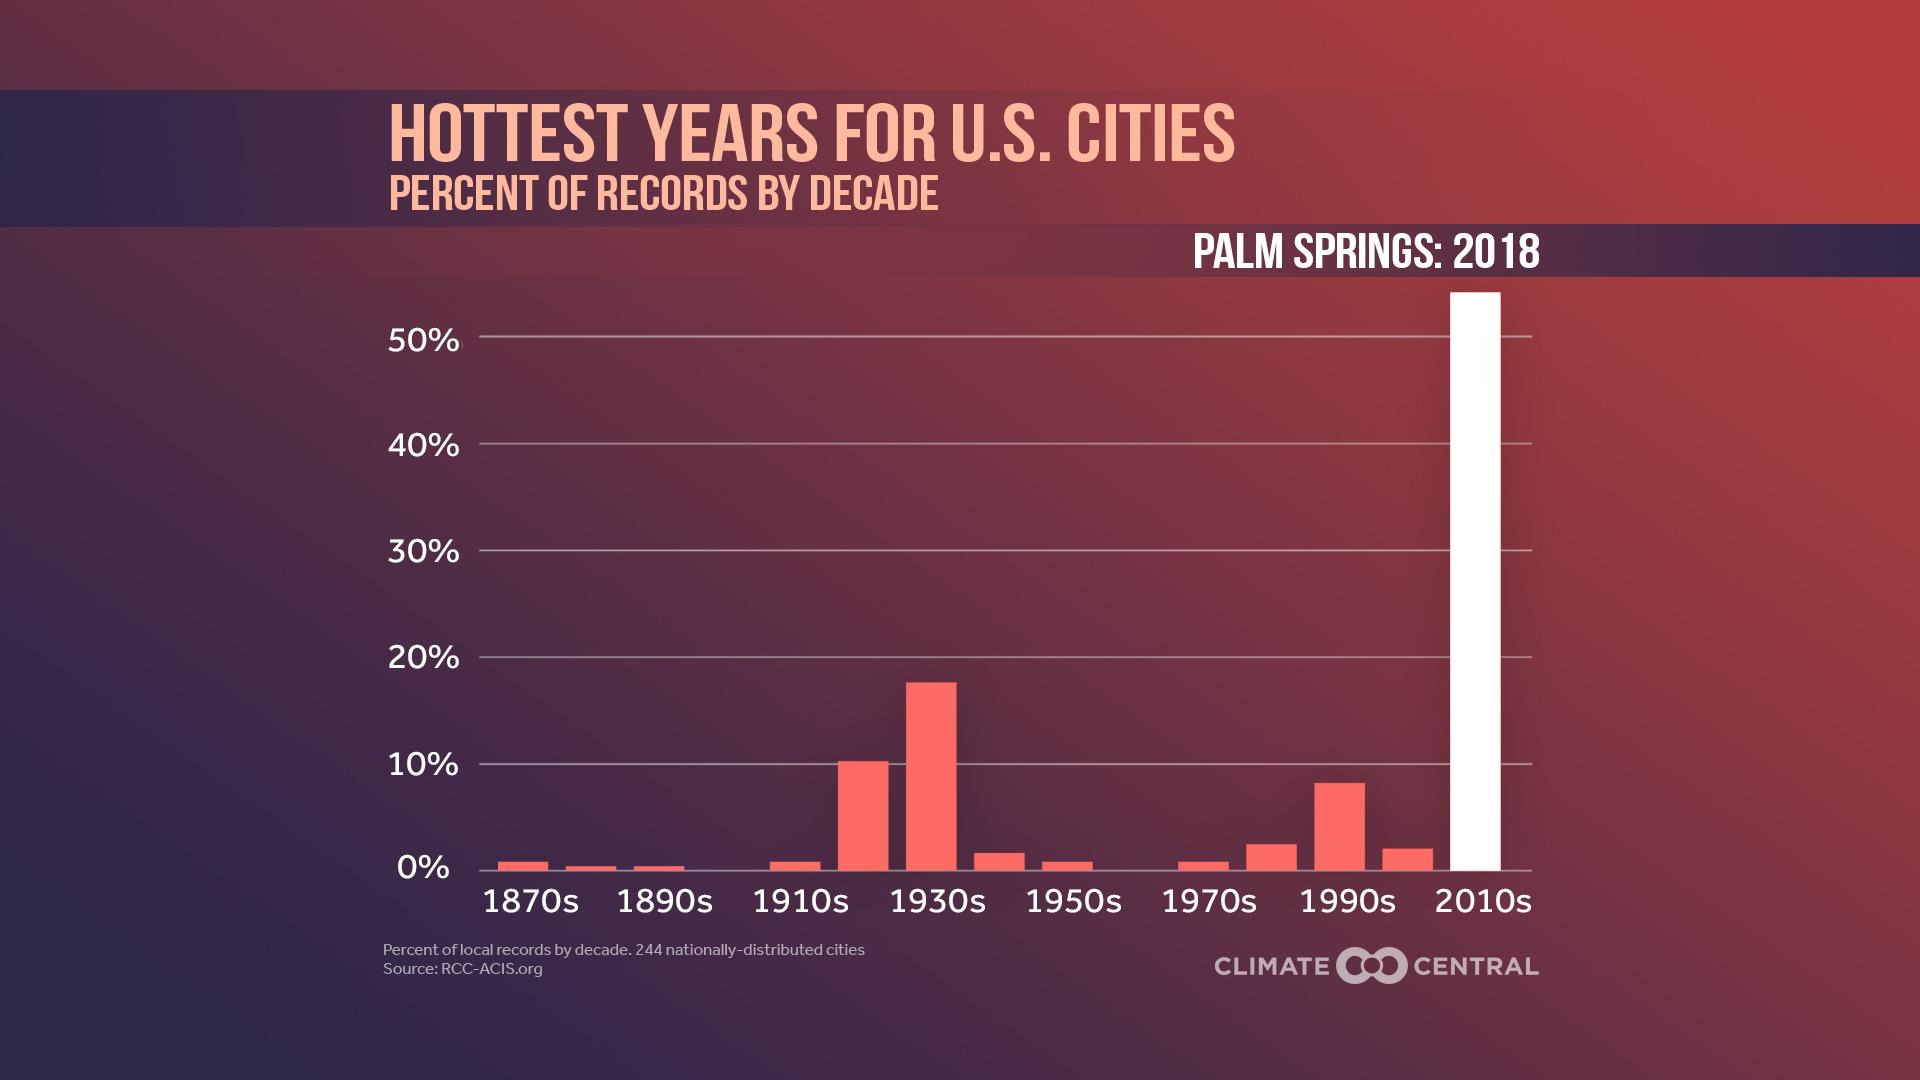 Locally Hottest Years